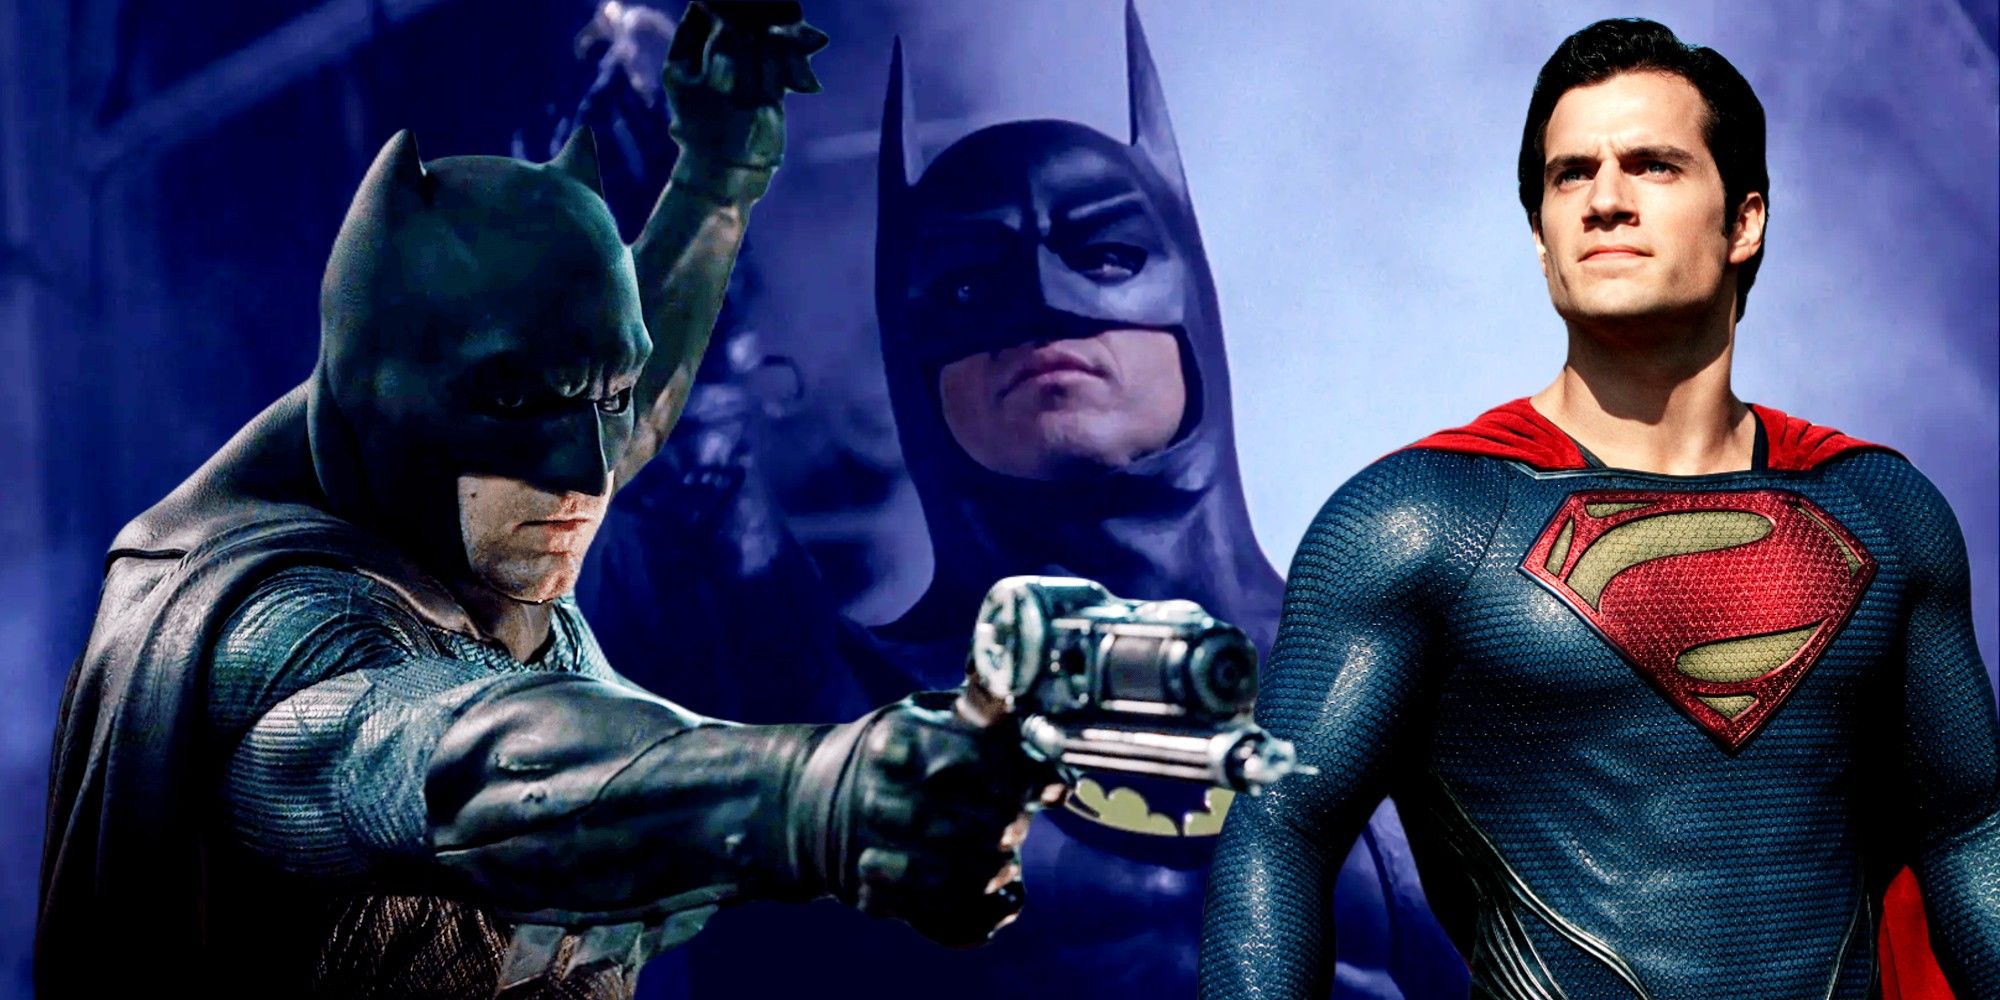 Michael Keaton's Batman in a blended image with Ben Affleck's Batman and Henry Cavill's Superman